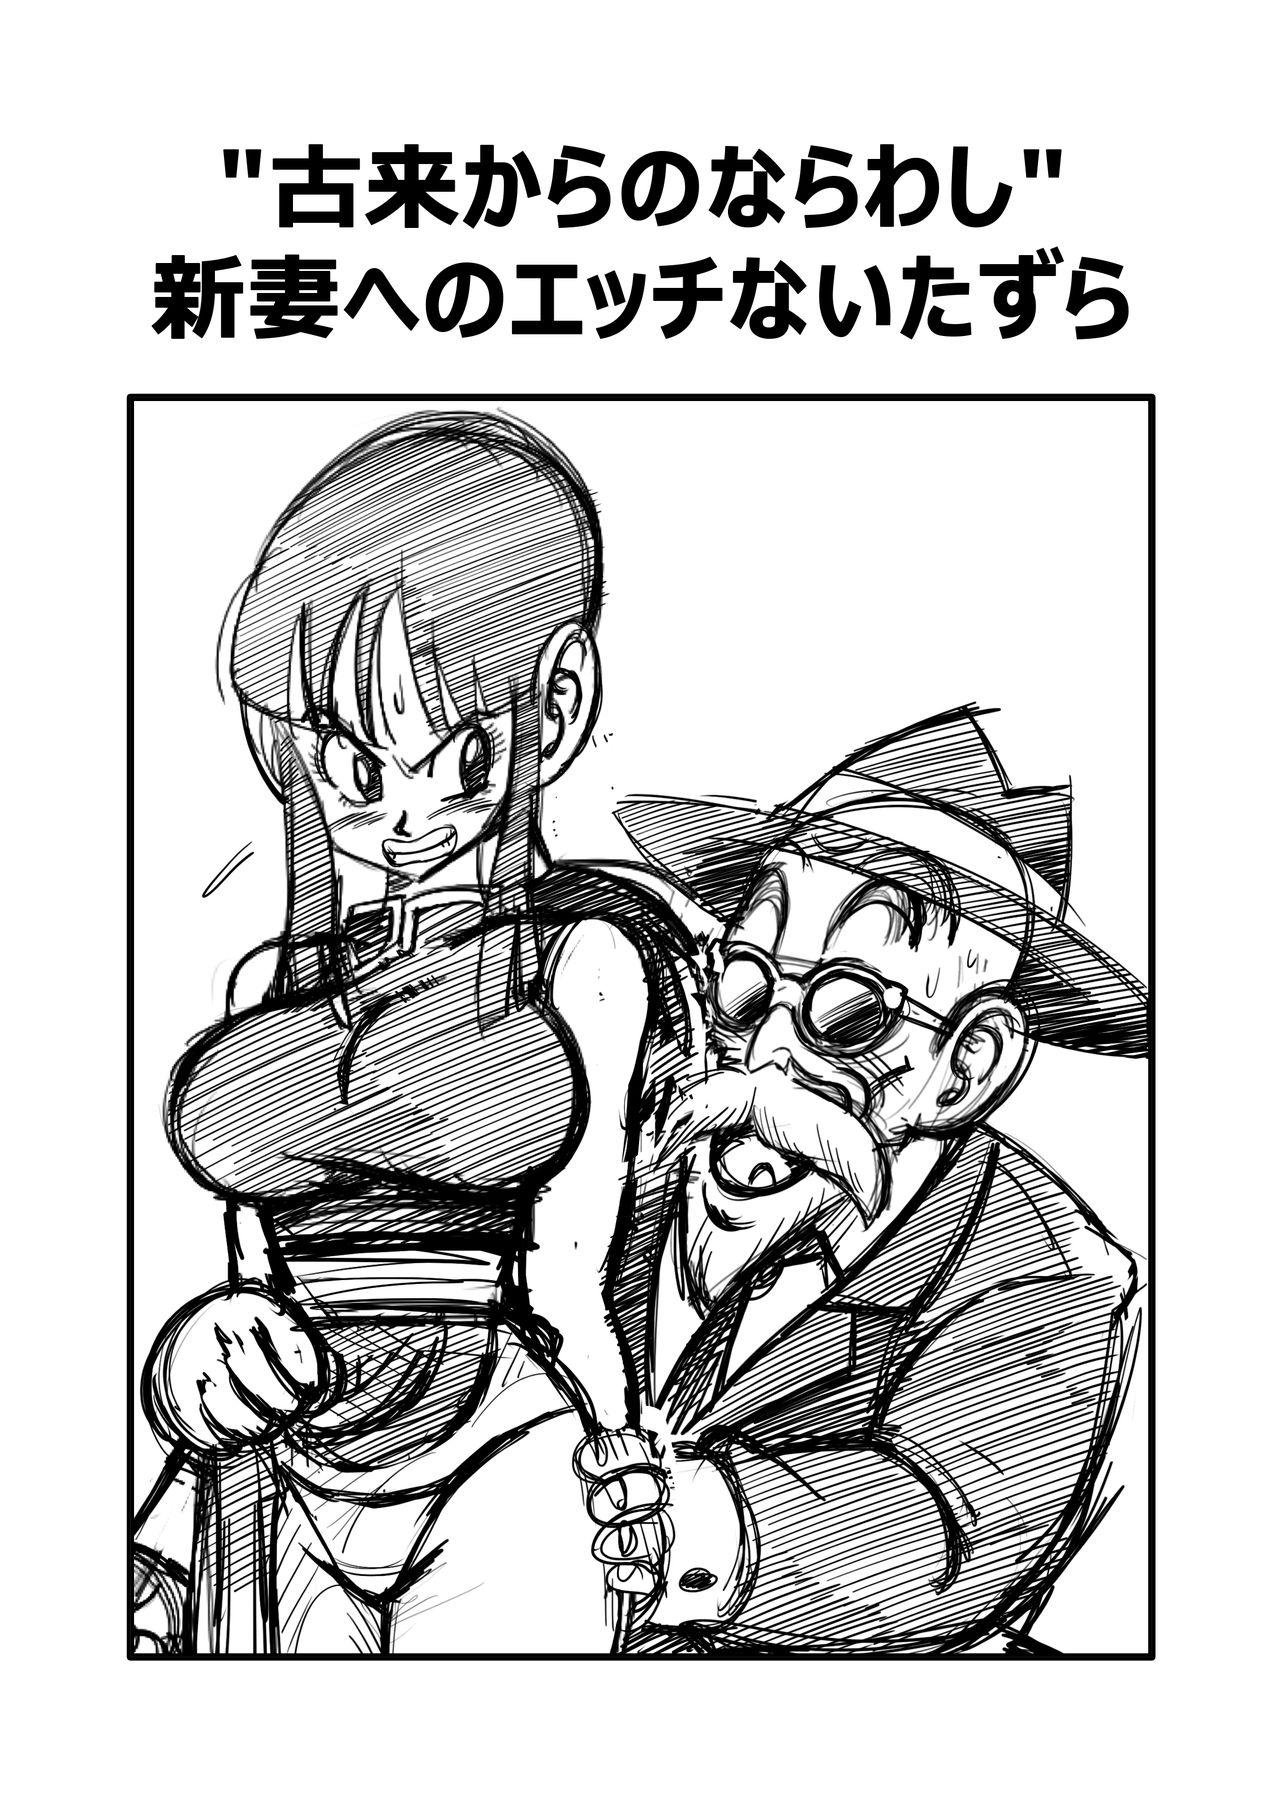 Rubbing "An Ancient Tradition" - Young Wife is Harassed! - Dragon ball z Messy - Page 3